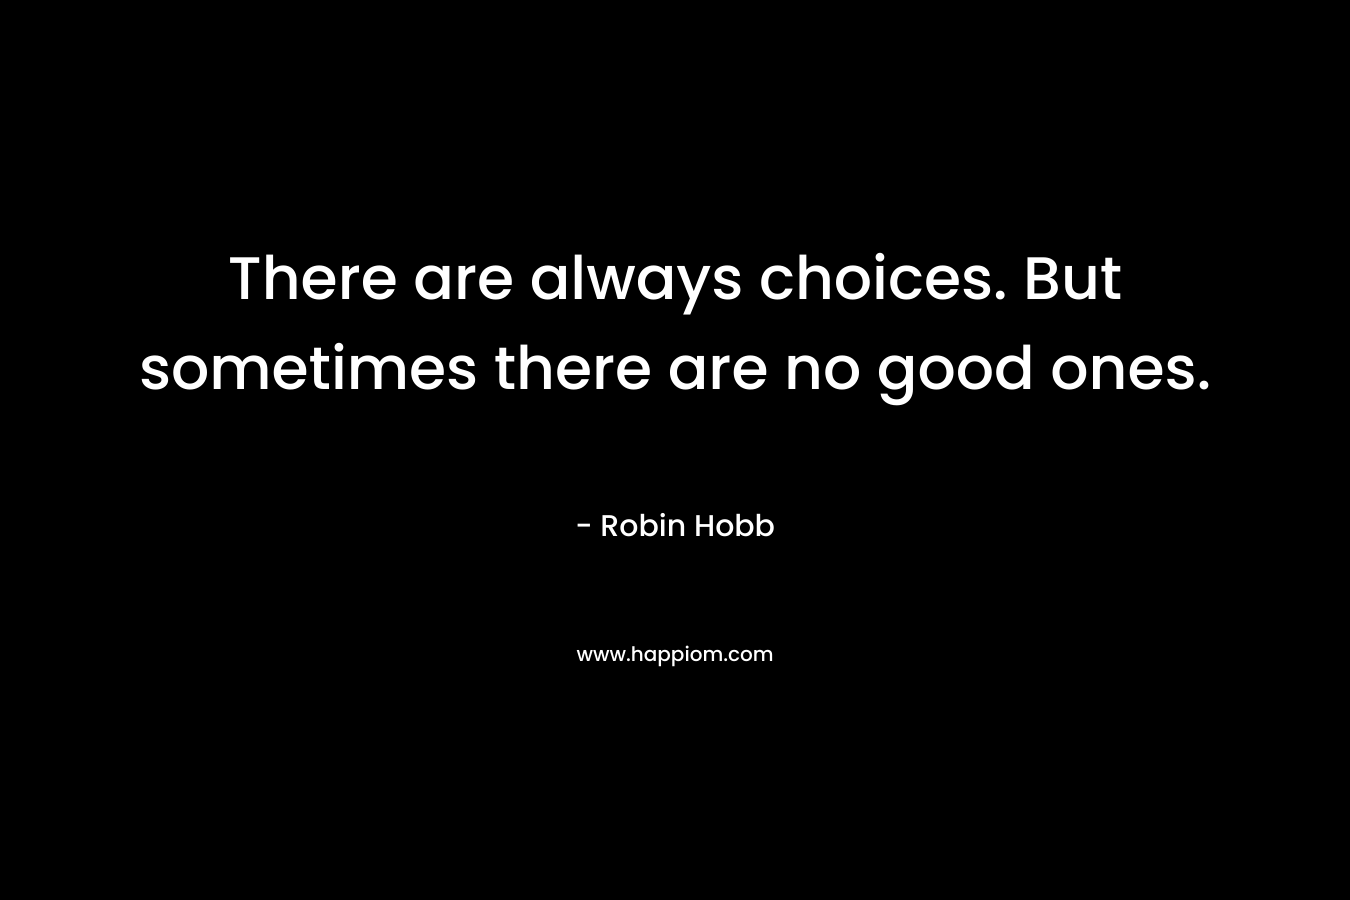 There are always choices. But sometimes there are no good ones.